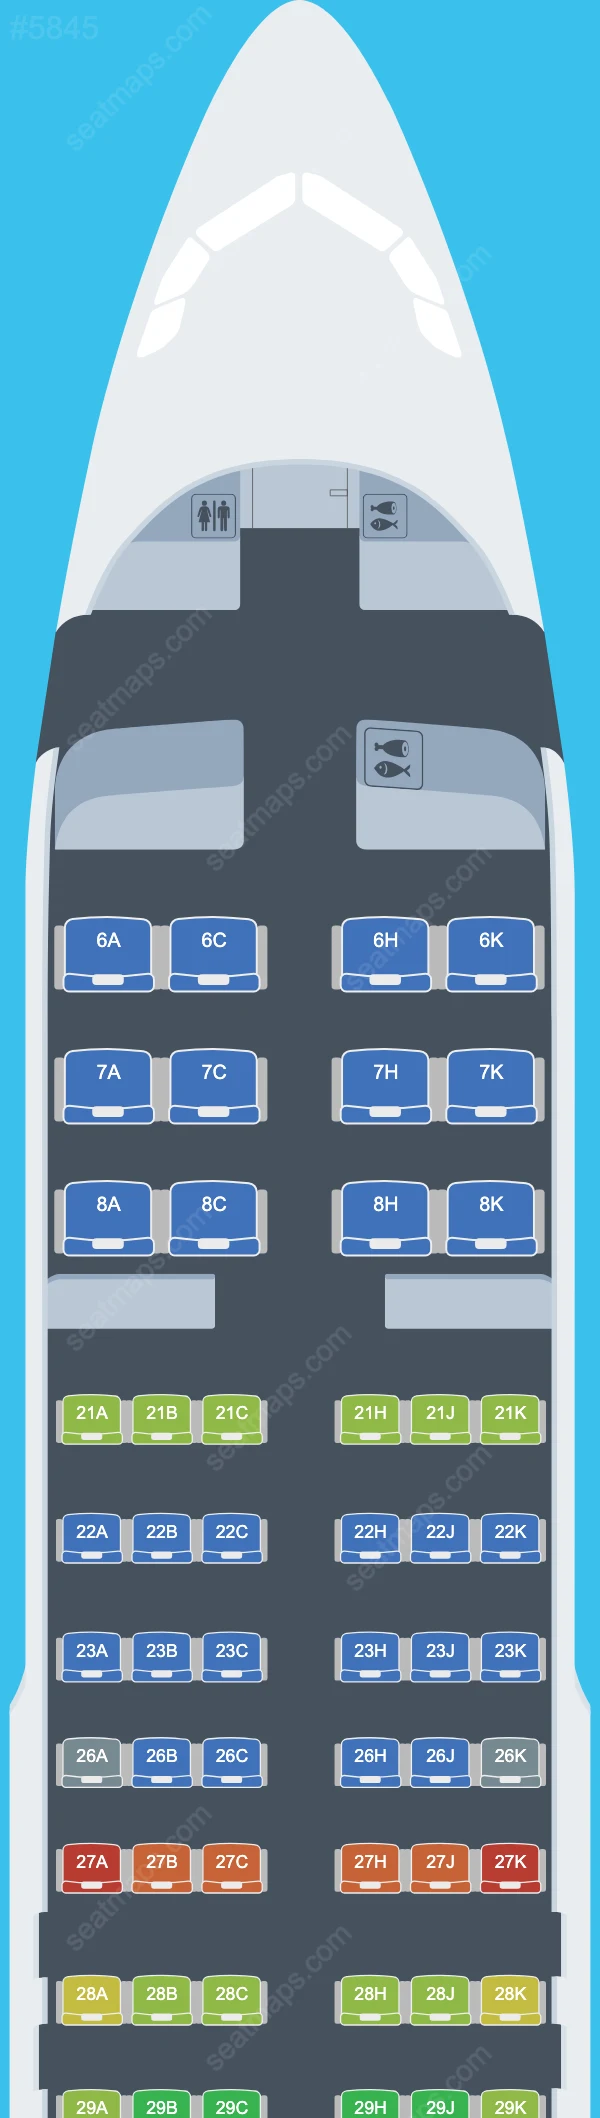 Royal Brunei Airlines Airbus A320 Seat Maps A320-200neo